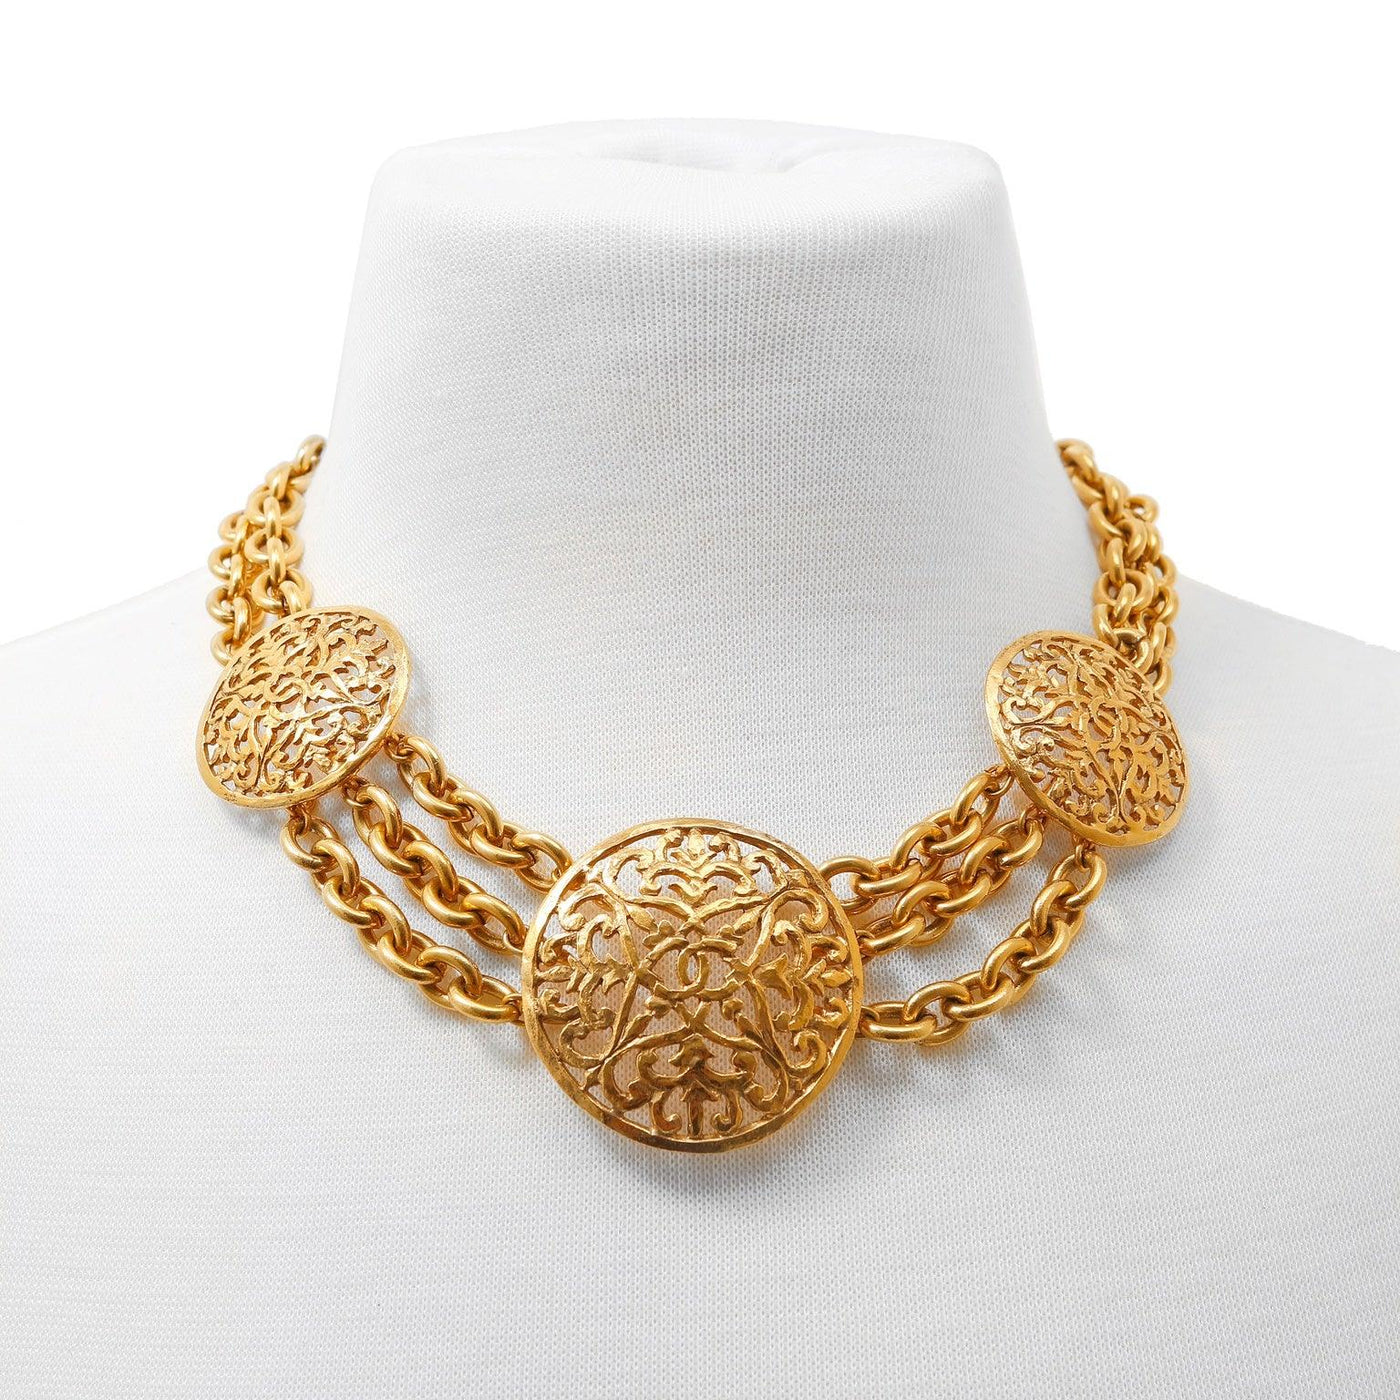 Chanel Gold CC Discs Multi Chain Choker - Only Authentics